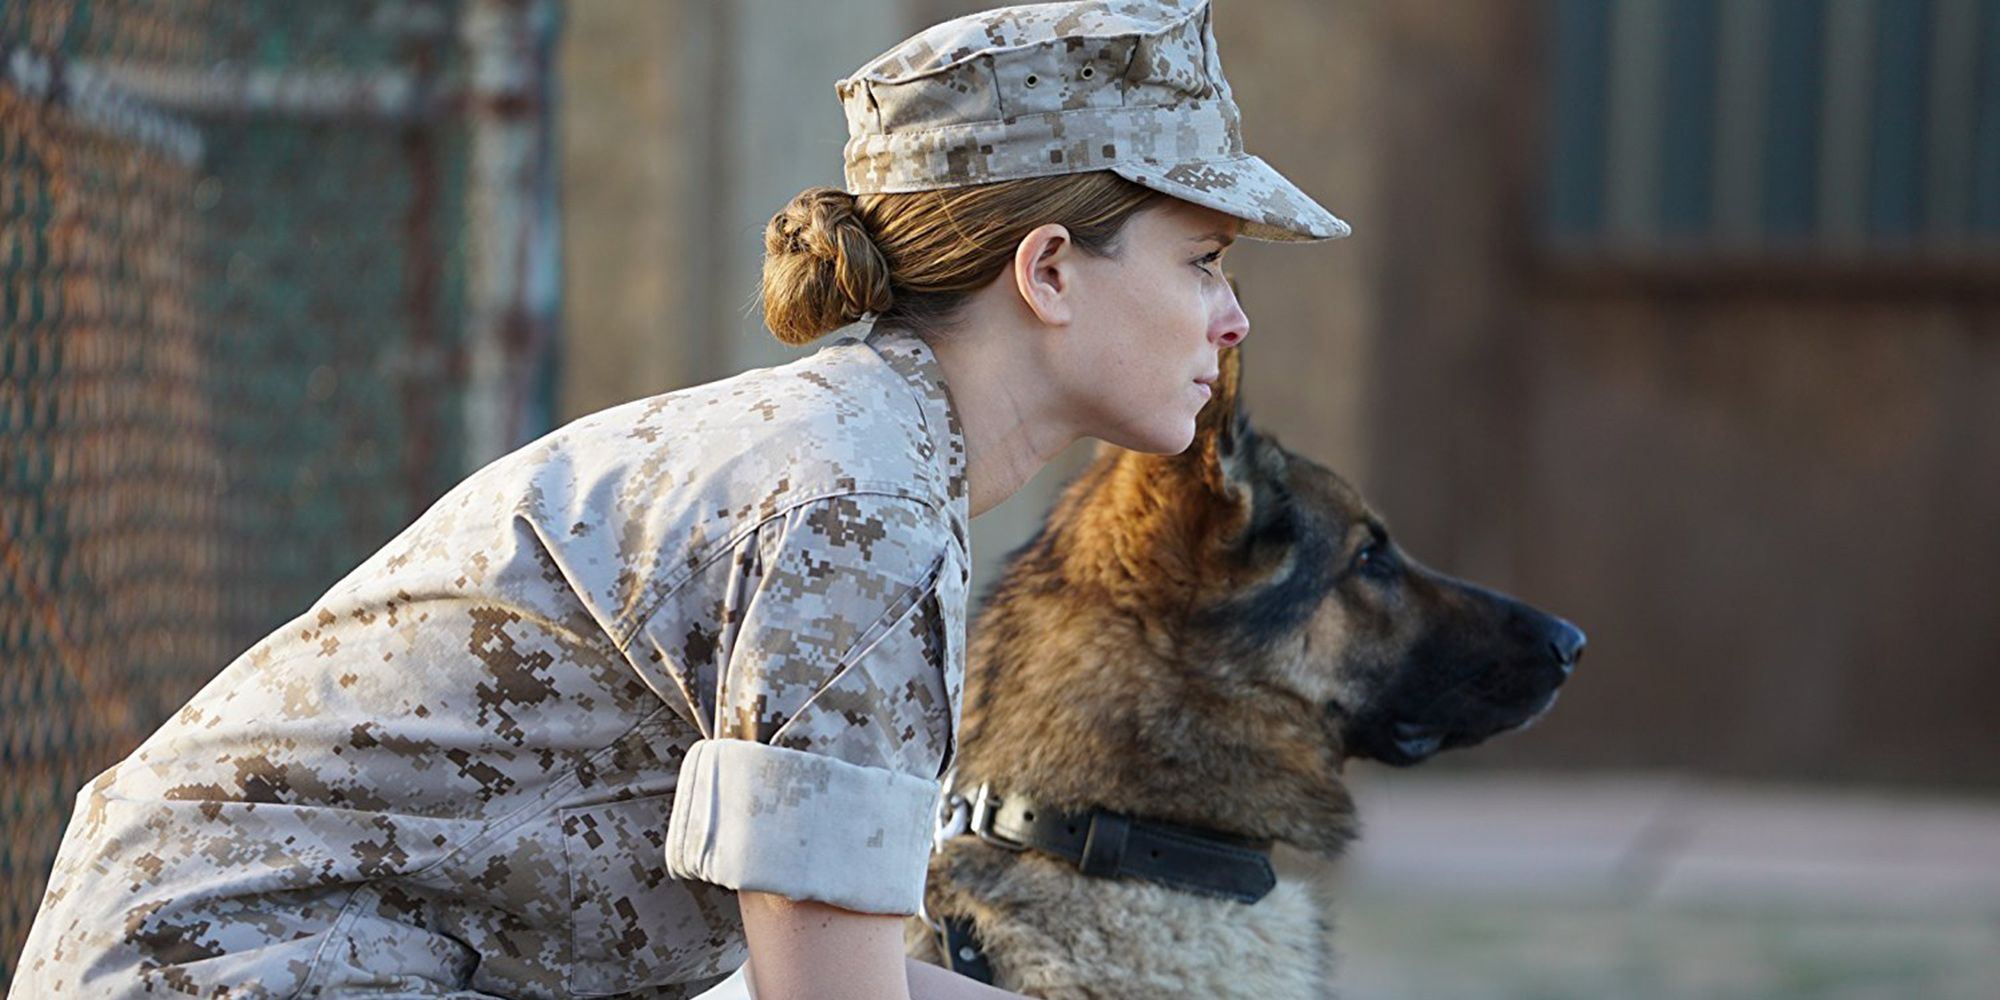 10 Great War Movies With Strong Female Leads